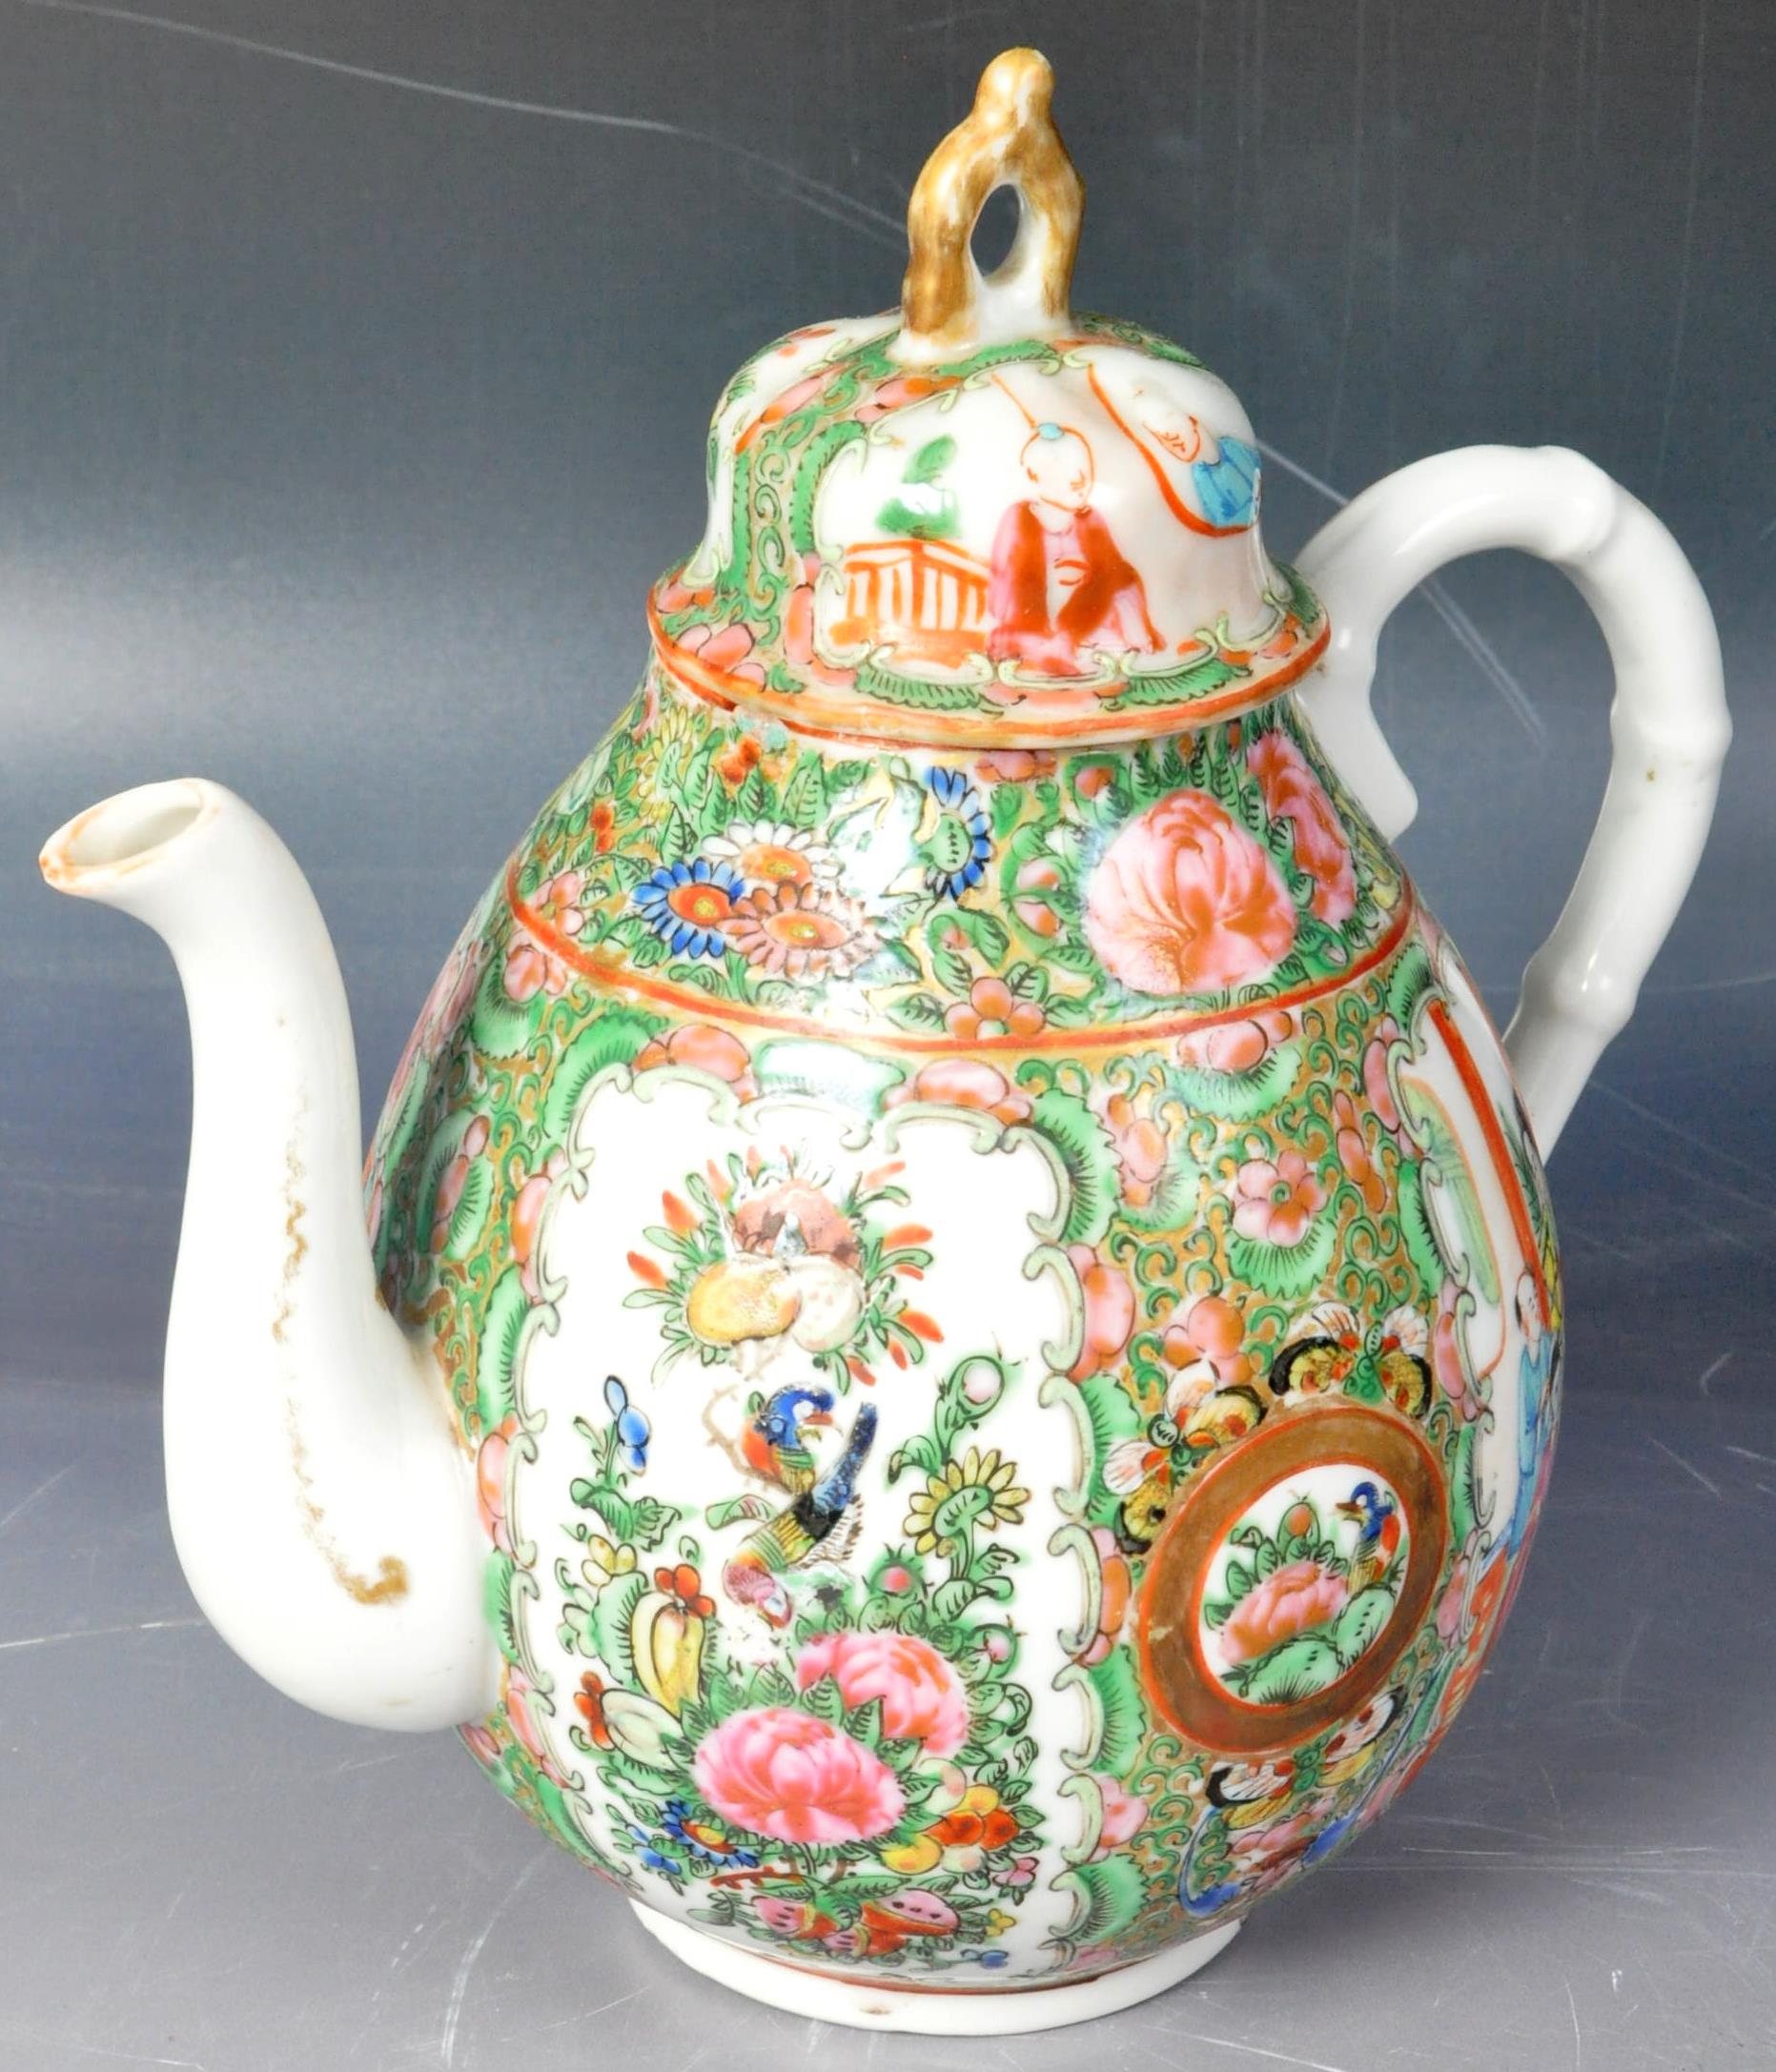 19TH CENTURY CHINESE CANTONESE PORCELAIN TEAPOT - Image 2 of 9